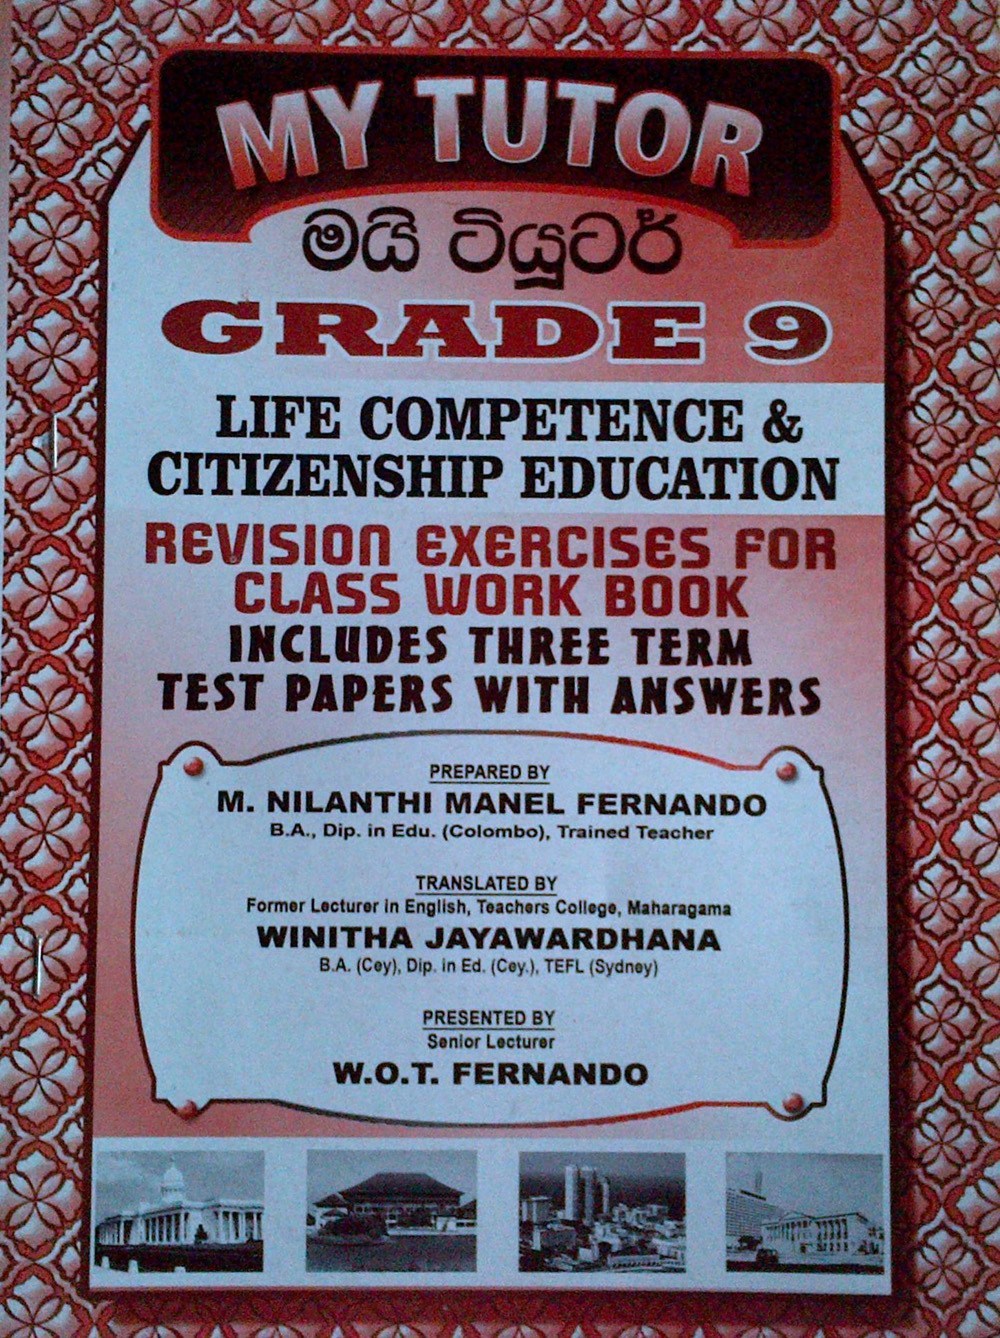 My Tutor Life Competence and Citizenship Education Grade 9 Revision Exercises for Class Work Book